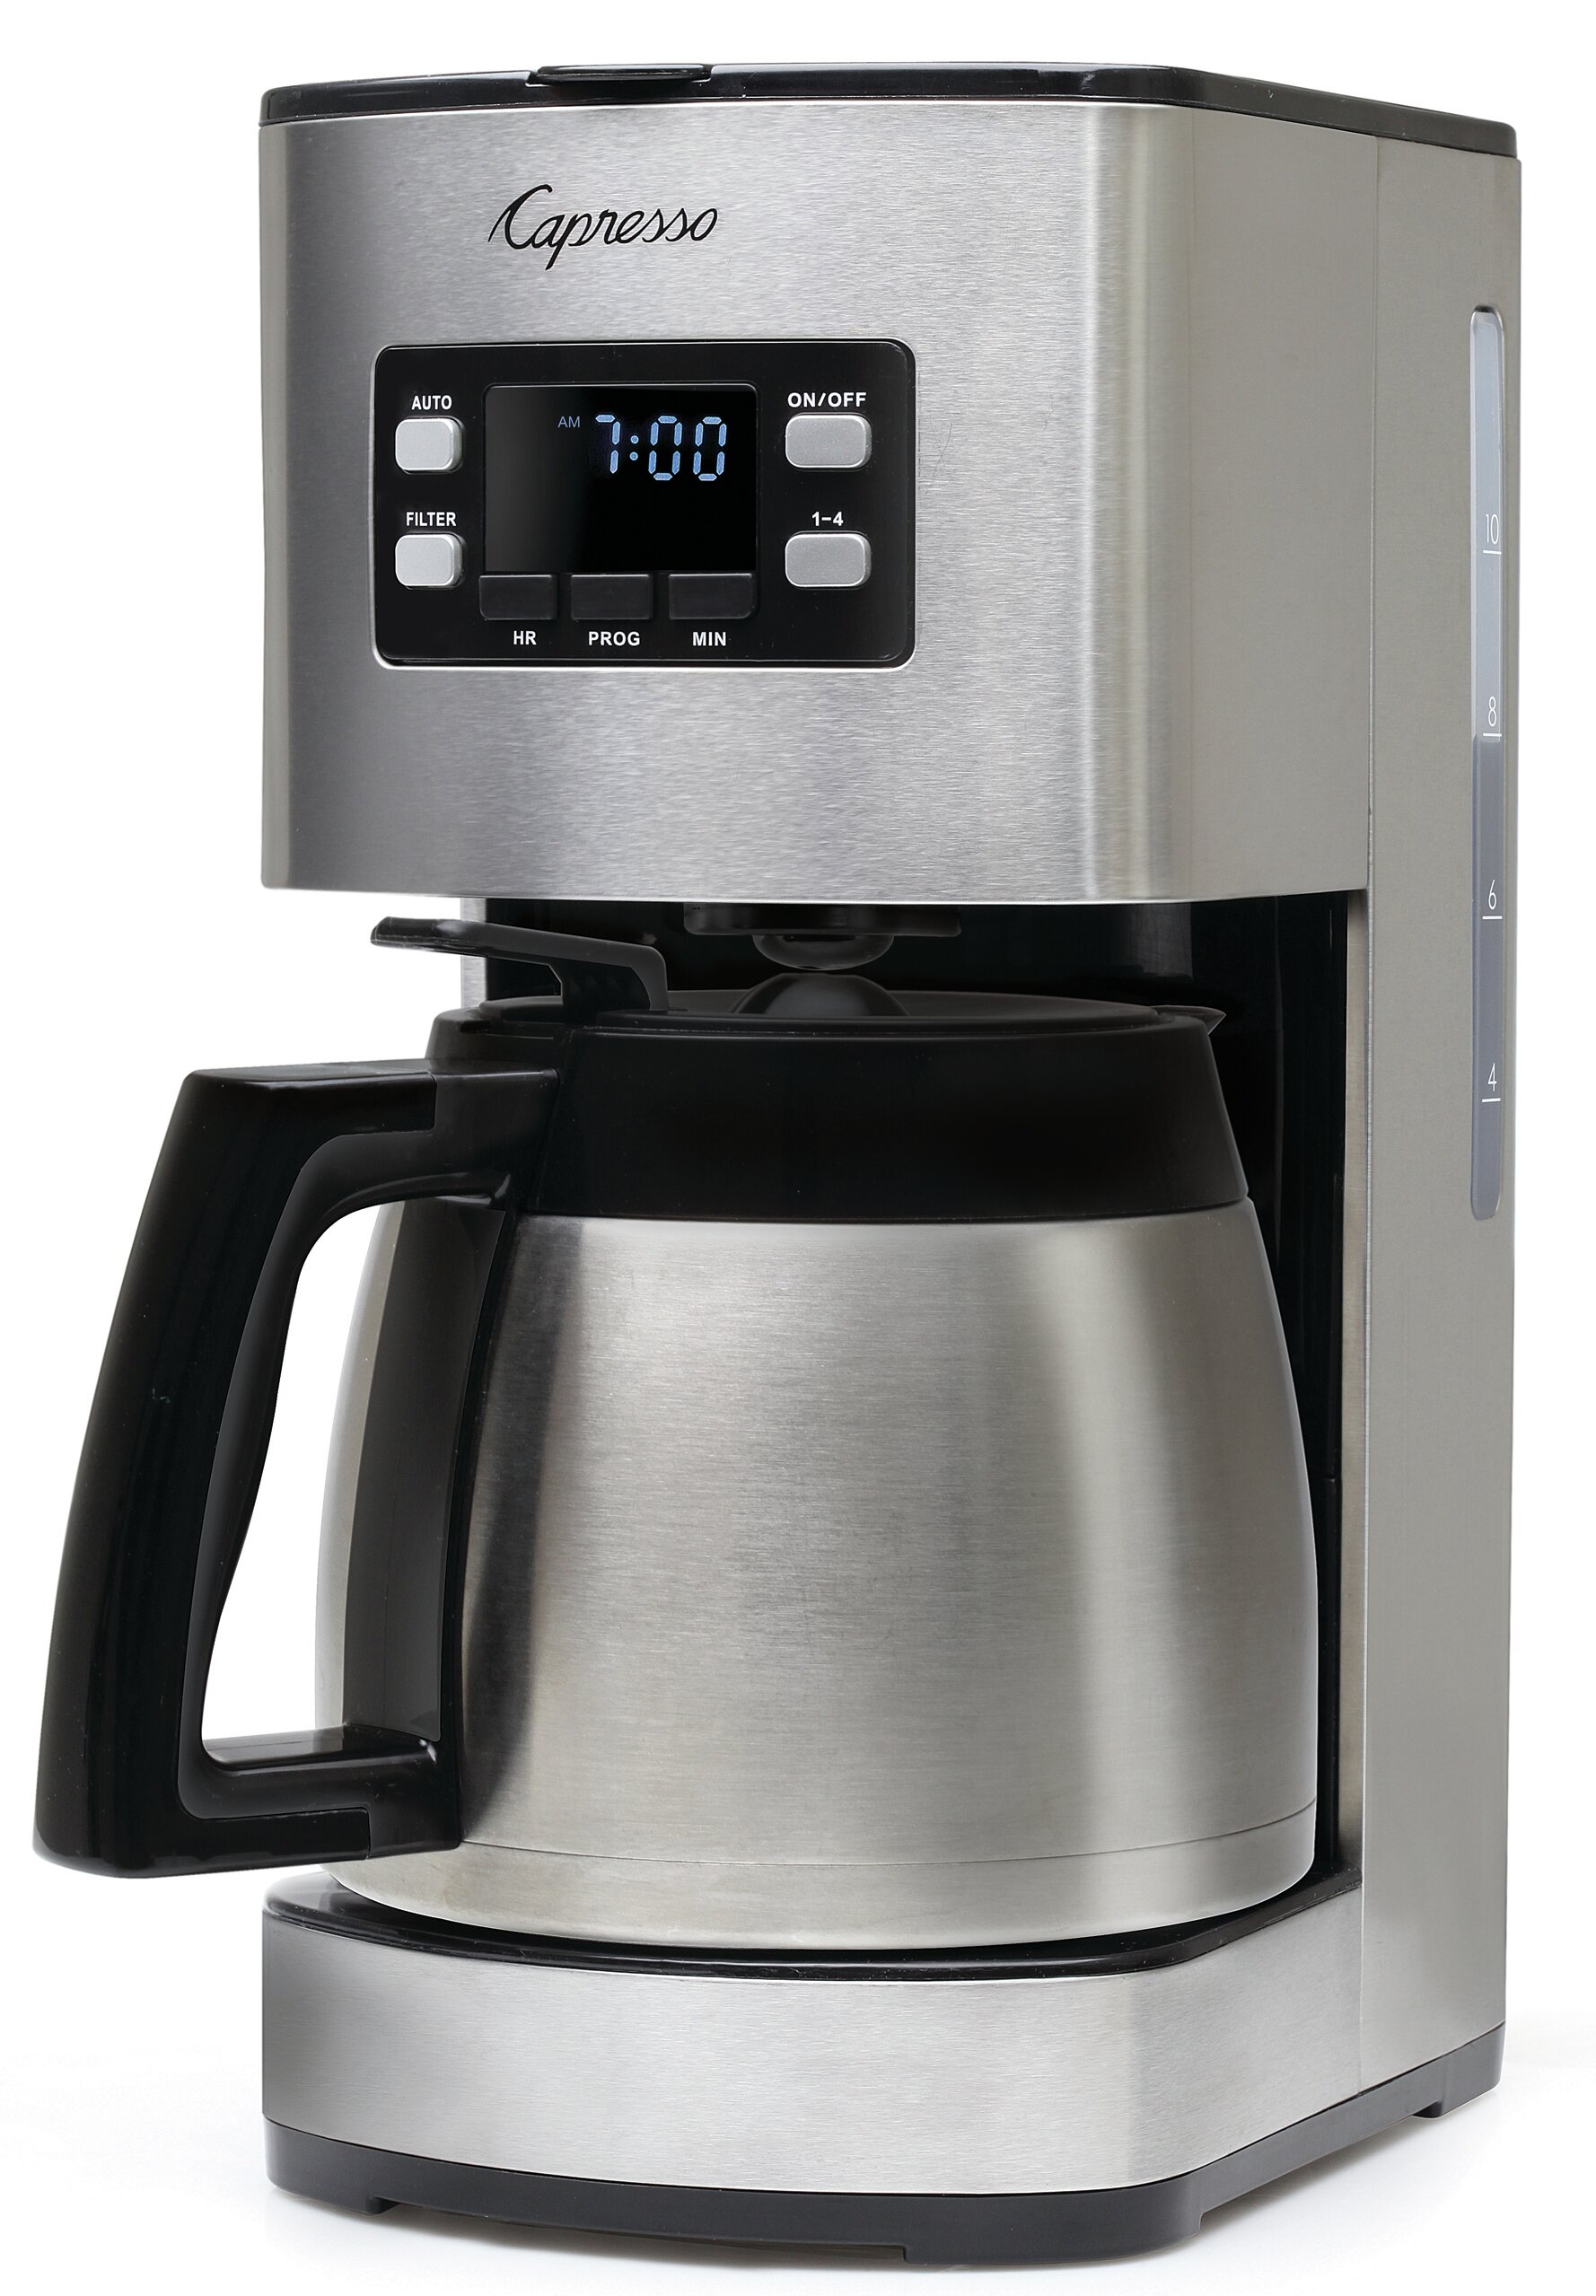 GE Cafe Stainless Steel 10-Cup Drip Coffee Maker with Thermal Carafe +  Reviews